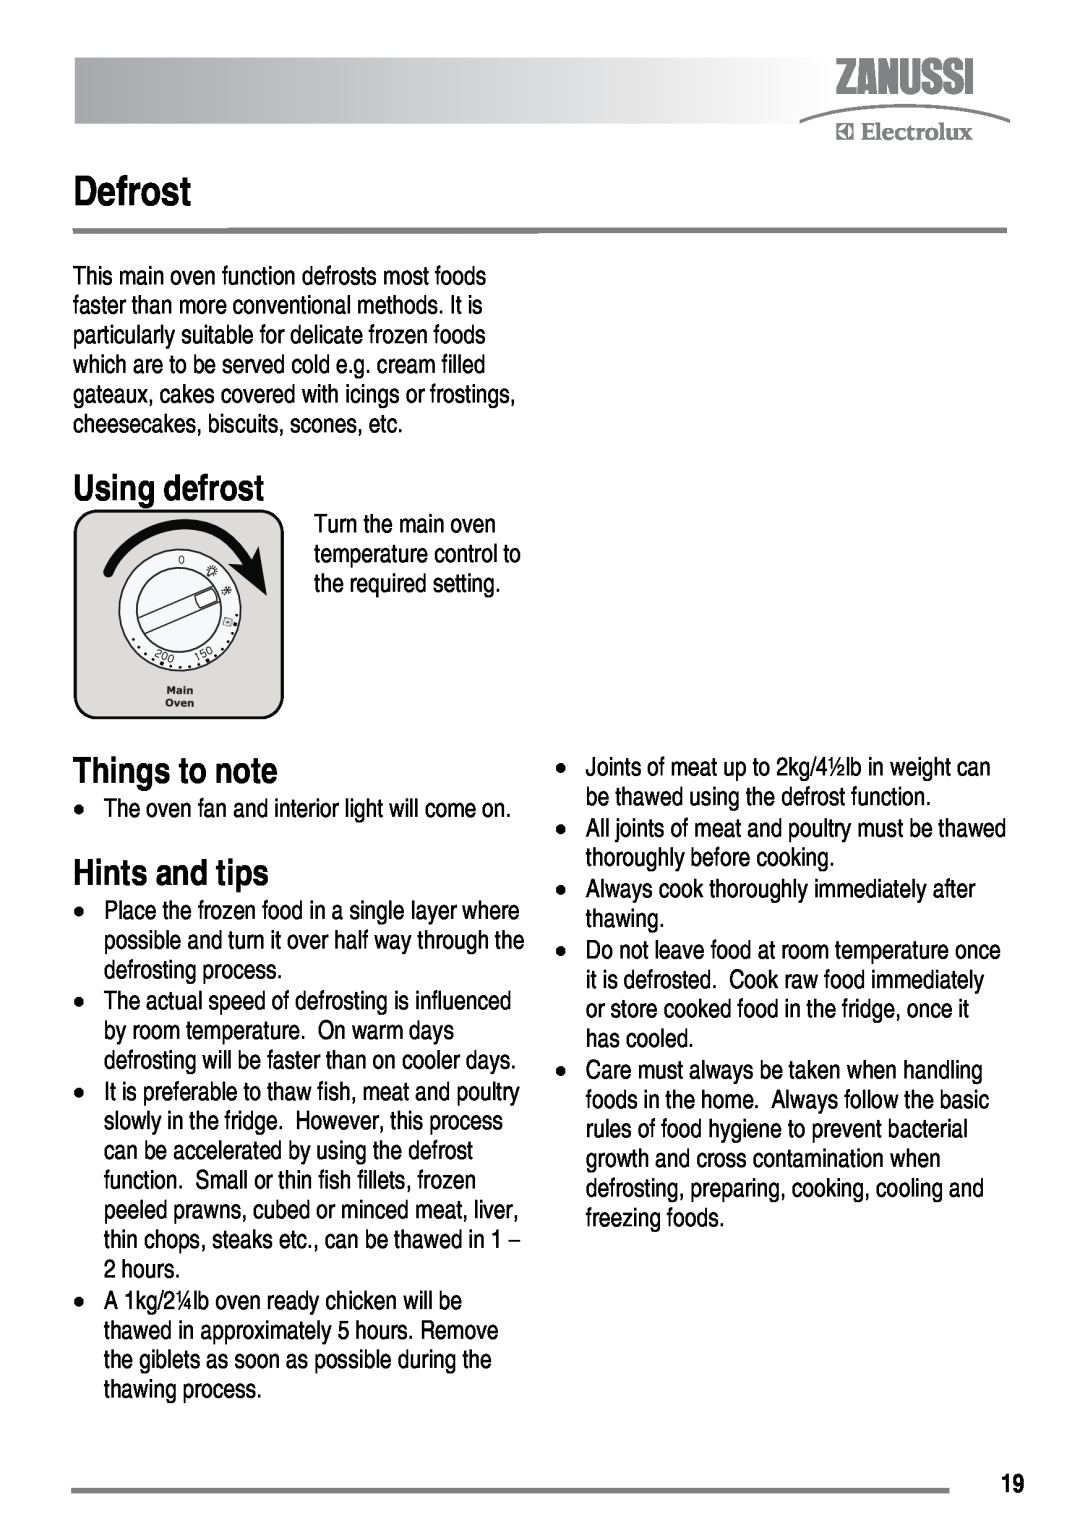 Zanussi ZKC6010 user manual Defrost, Using defrost, Things to note, Hints and tips 